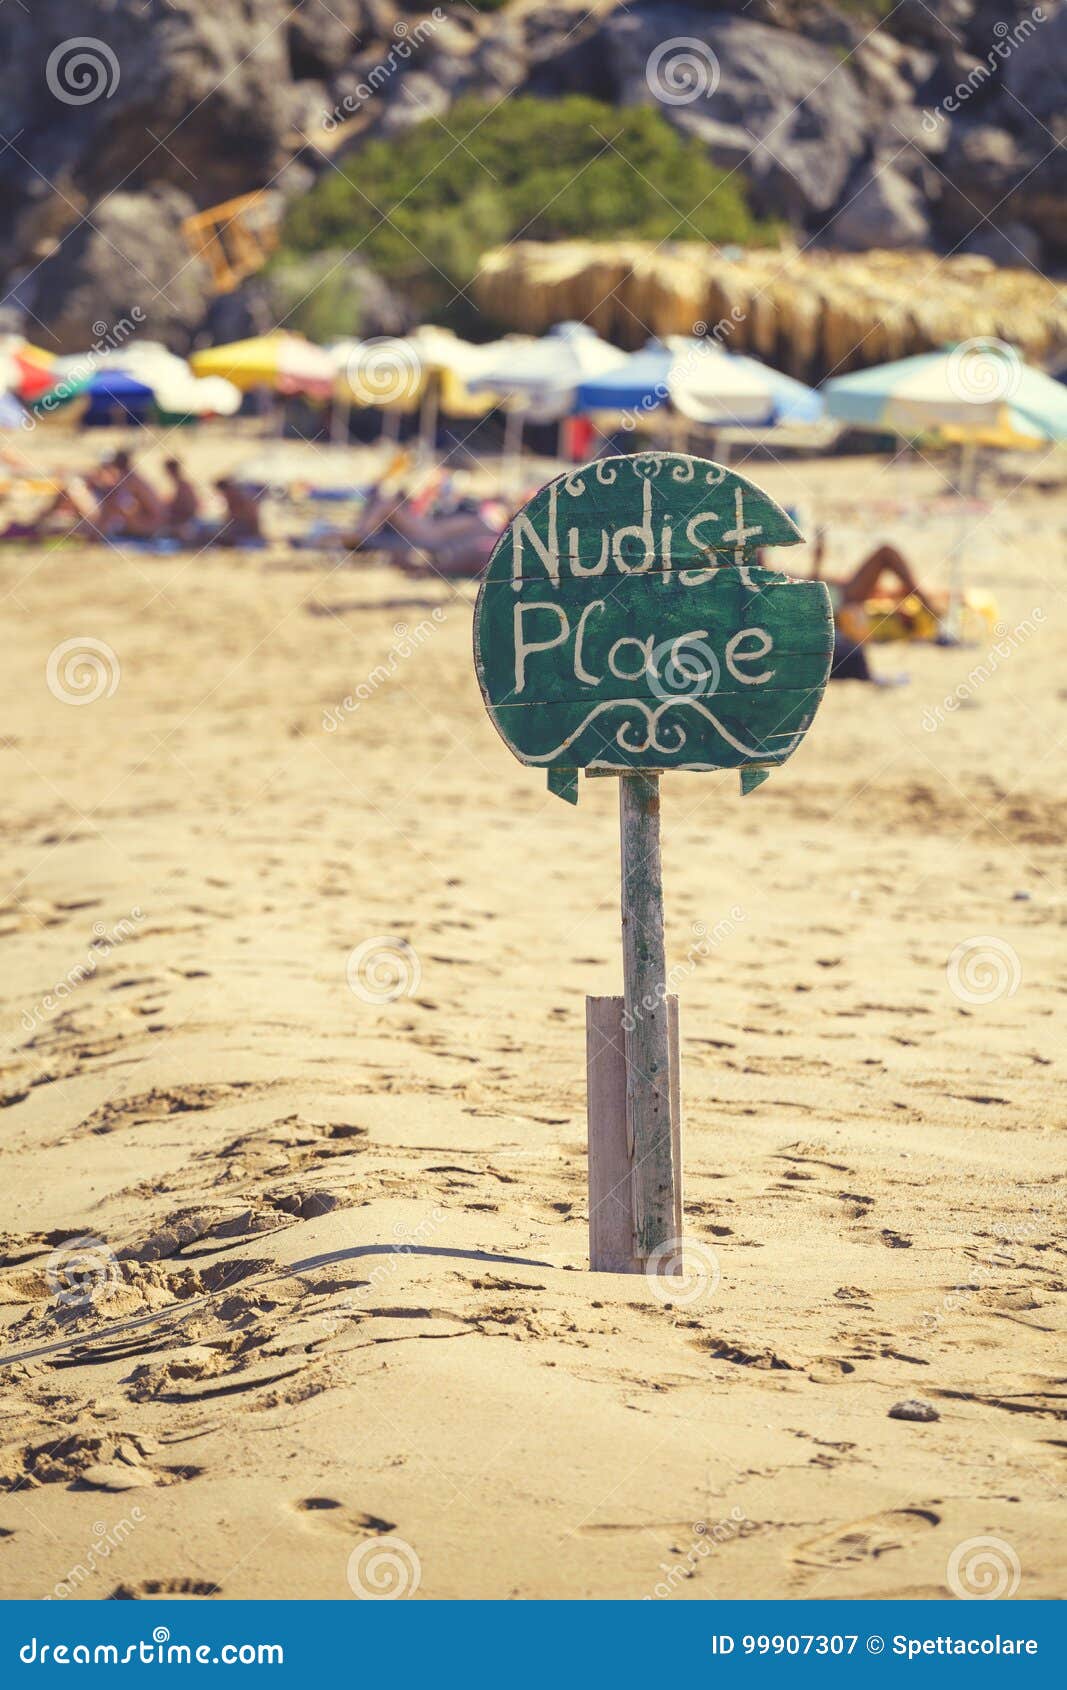 Nudist Place Wooden Sign 3 Stock Photo